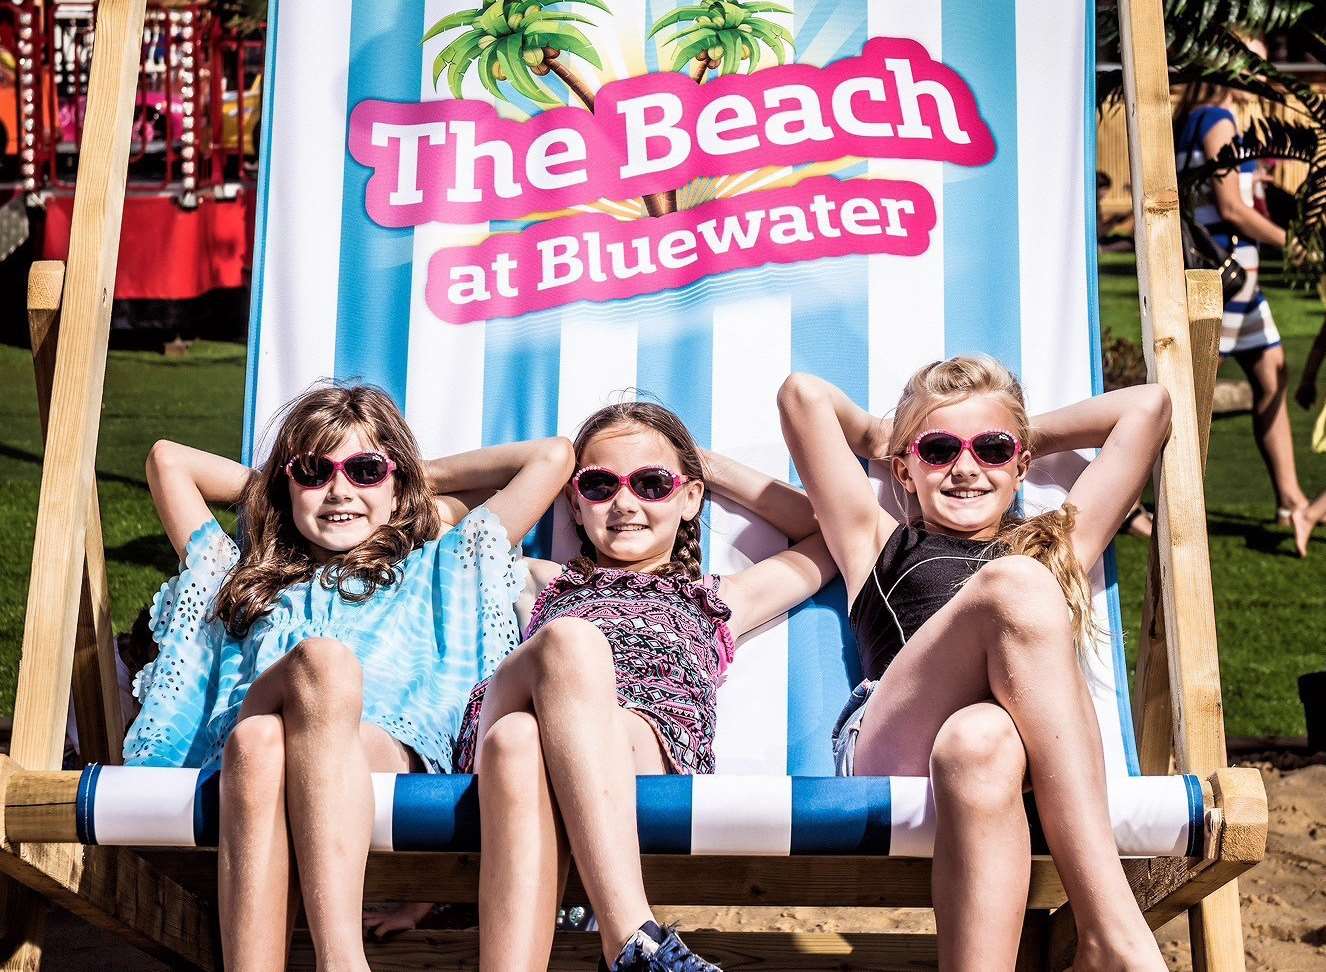 The Beach is at Bluewater this summer